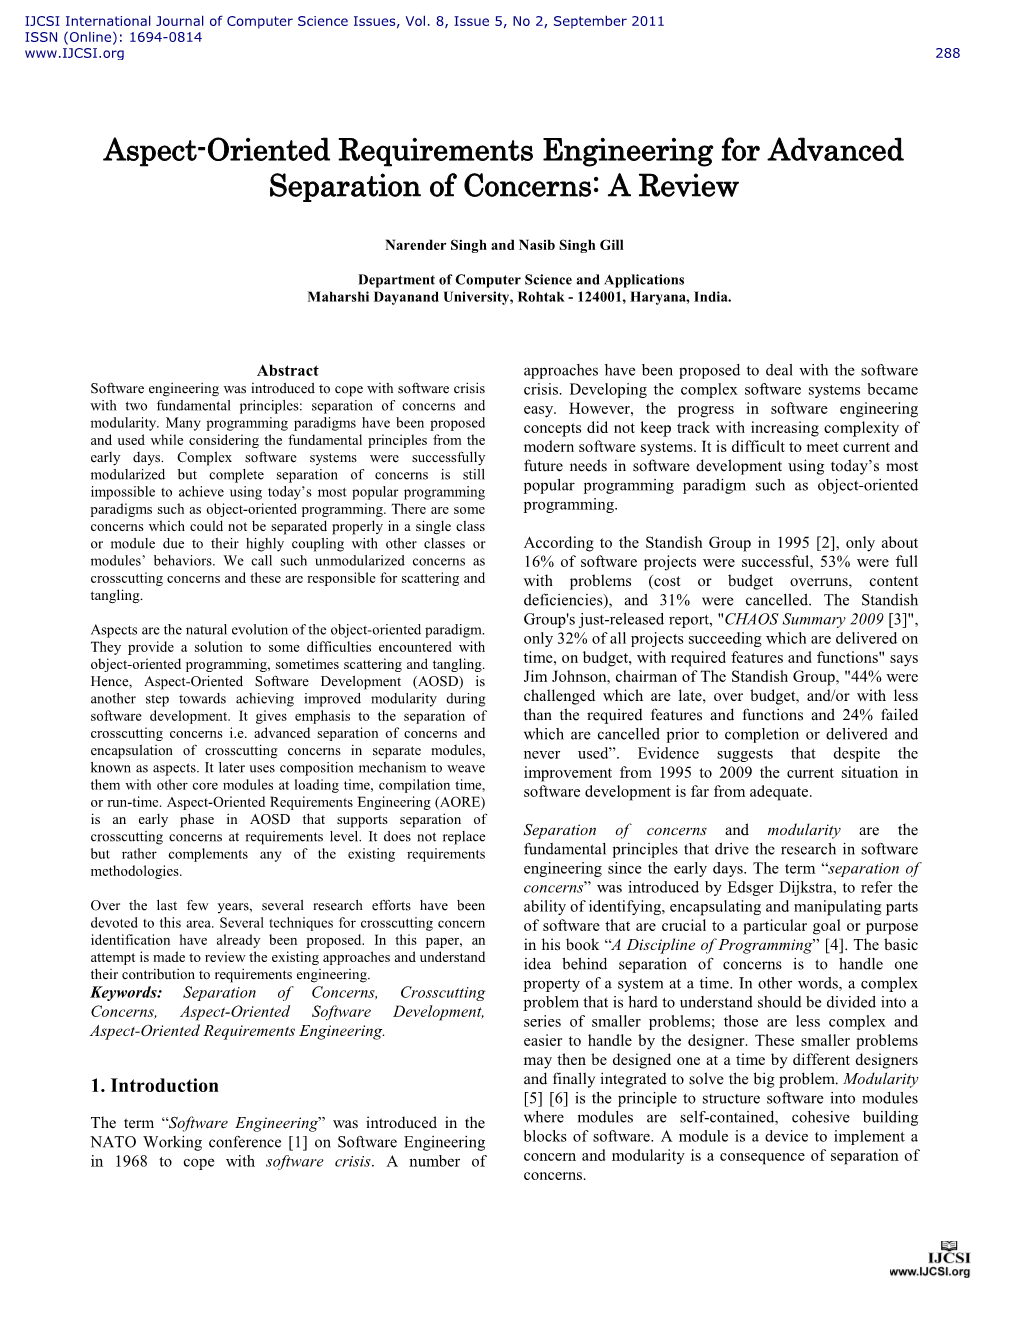 Aspect-Oriented Requirements Engineering for Advanced Separation of Concerns: a Review